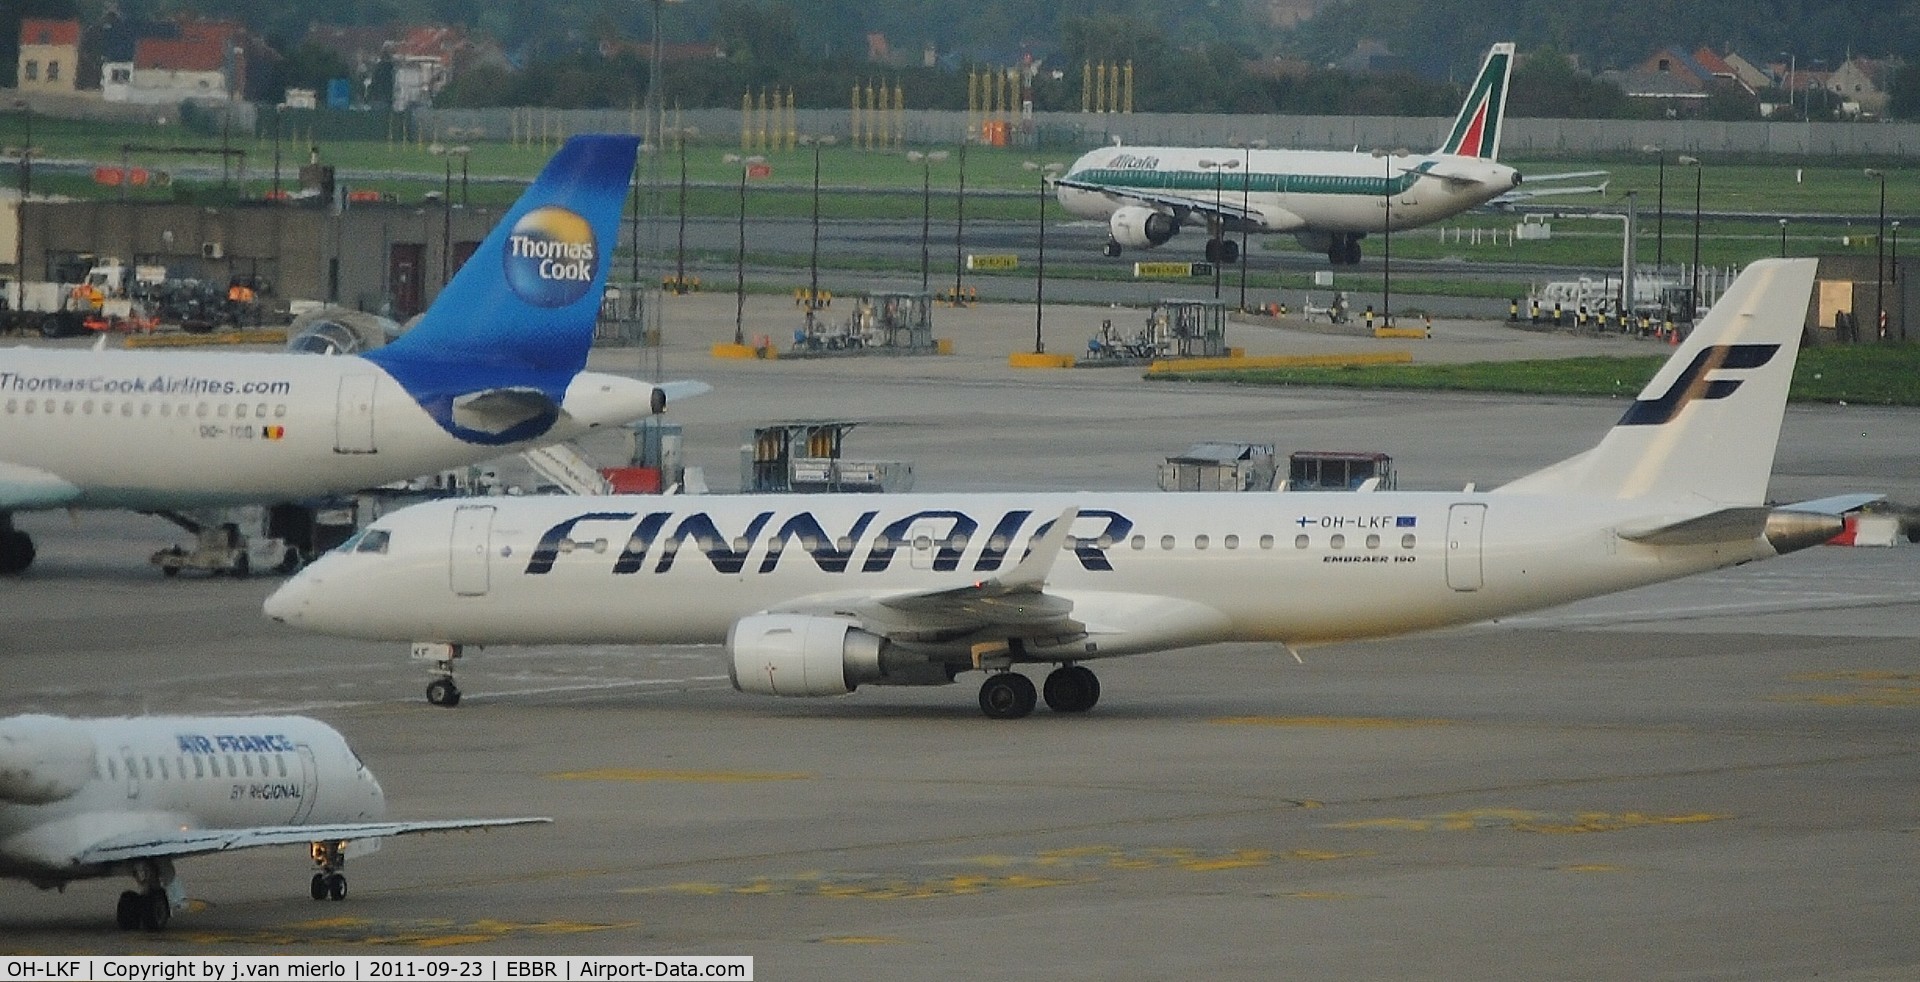 OH-LKF, 2007 Embraer 190LR (ERJ-190-100LR) C/N 19000066, Brussels...pic taken from the reastaurant